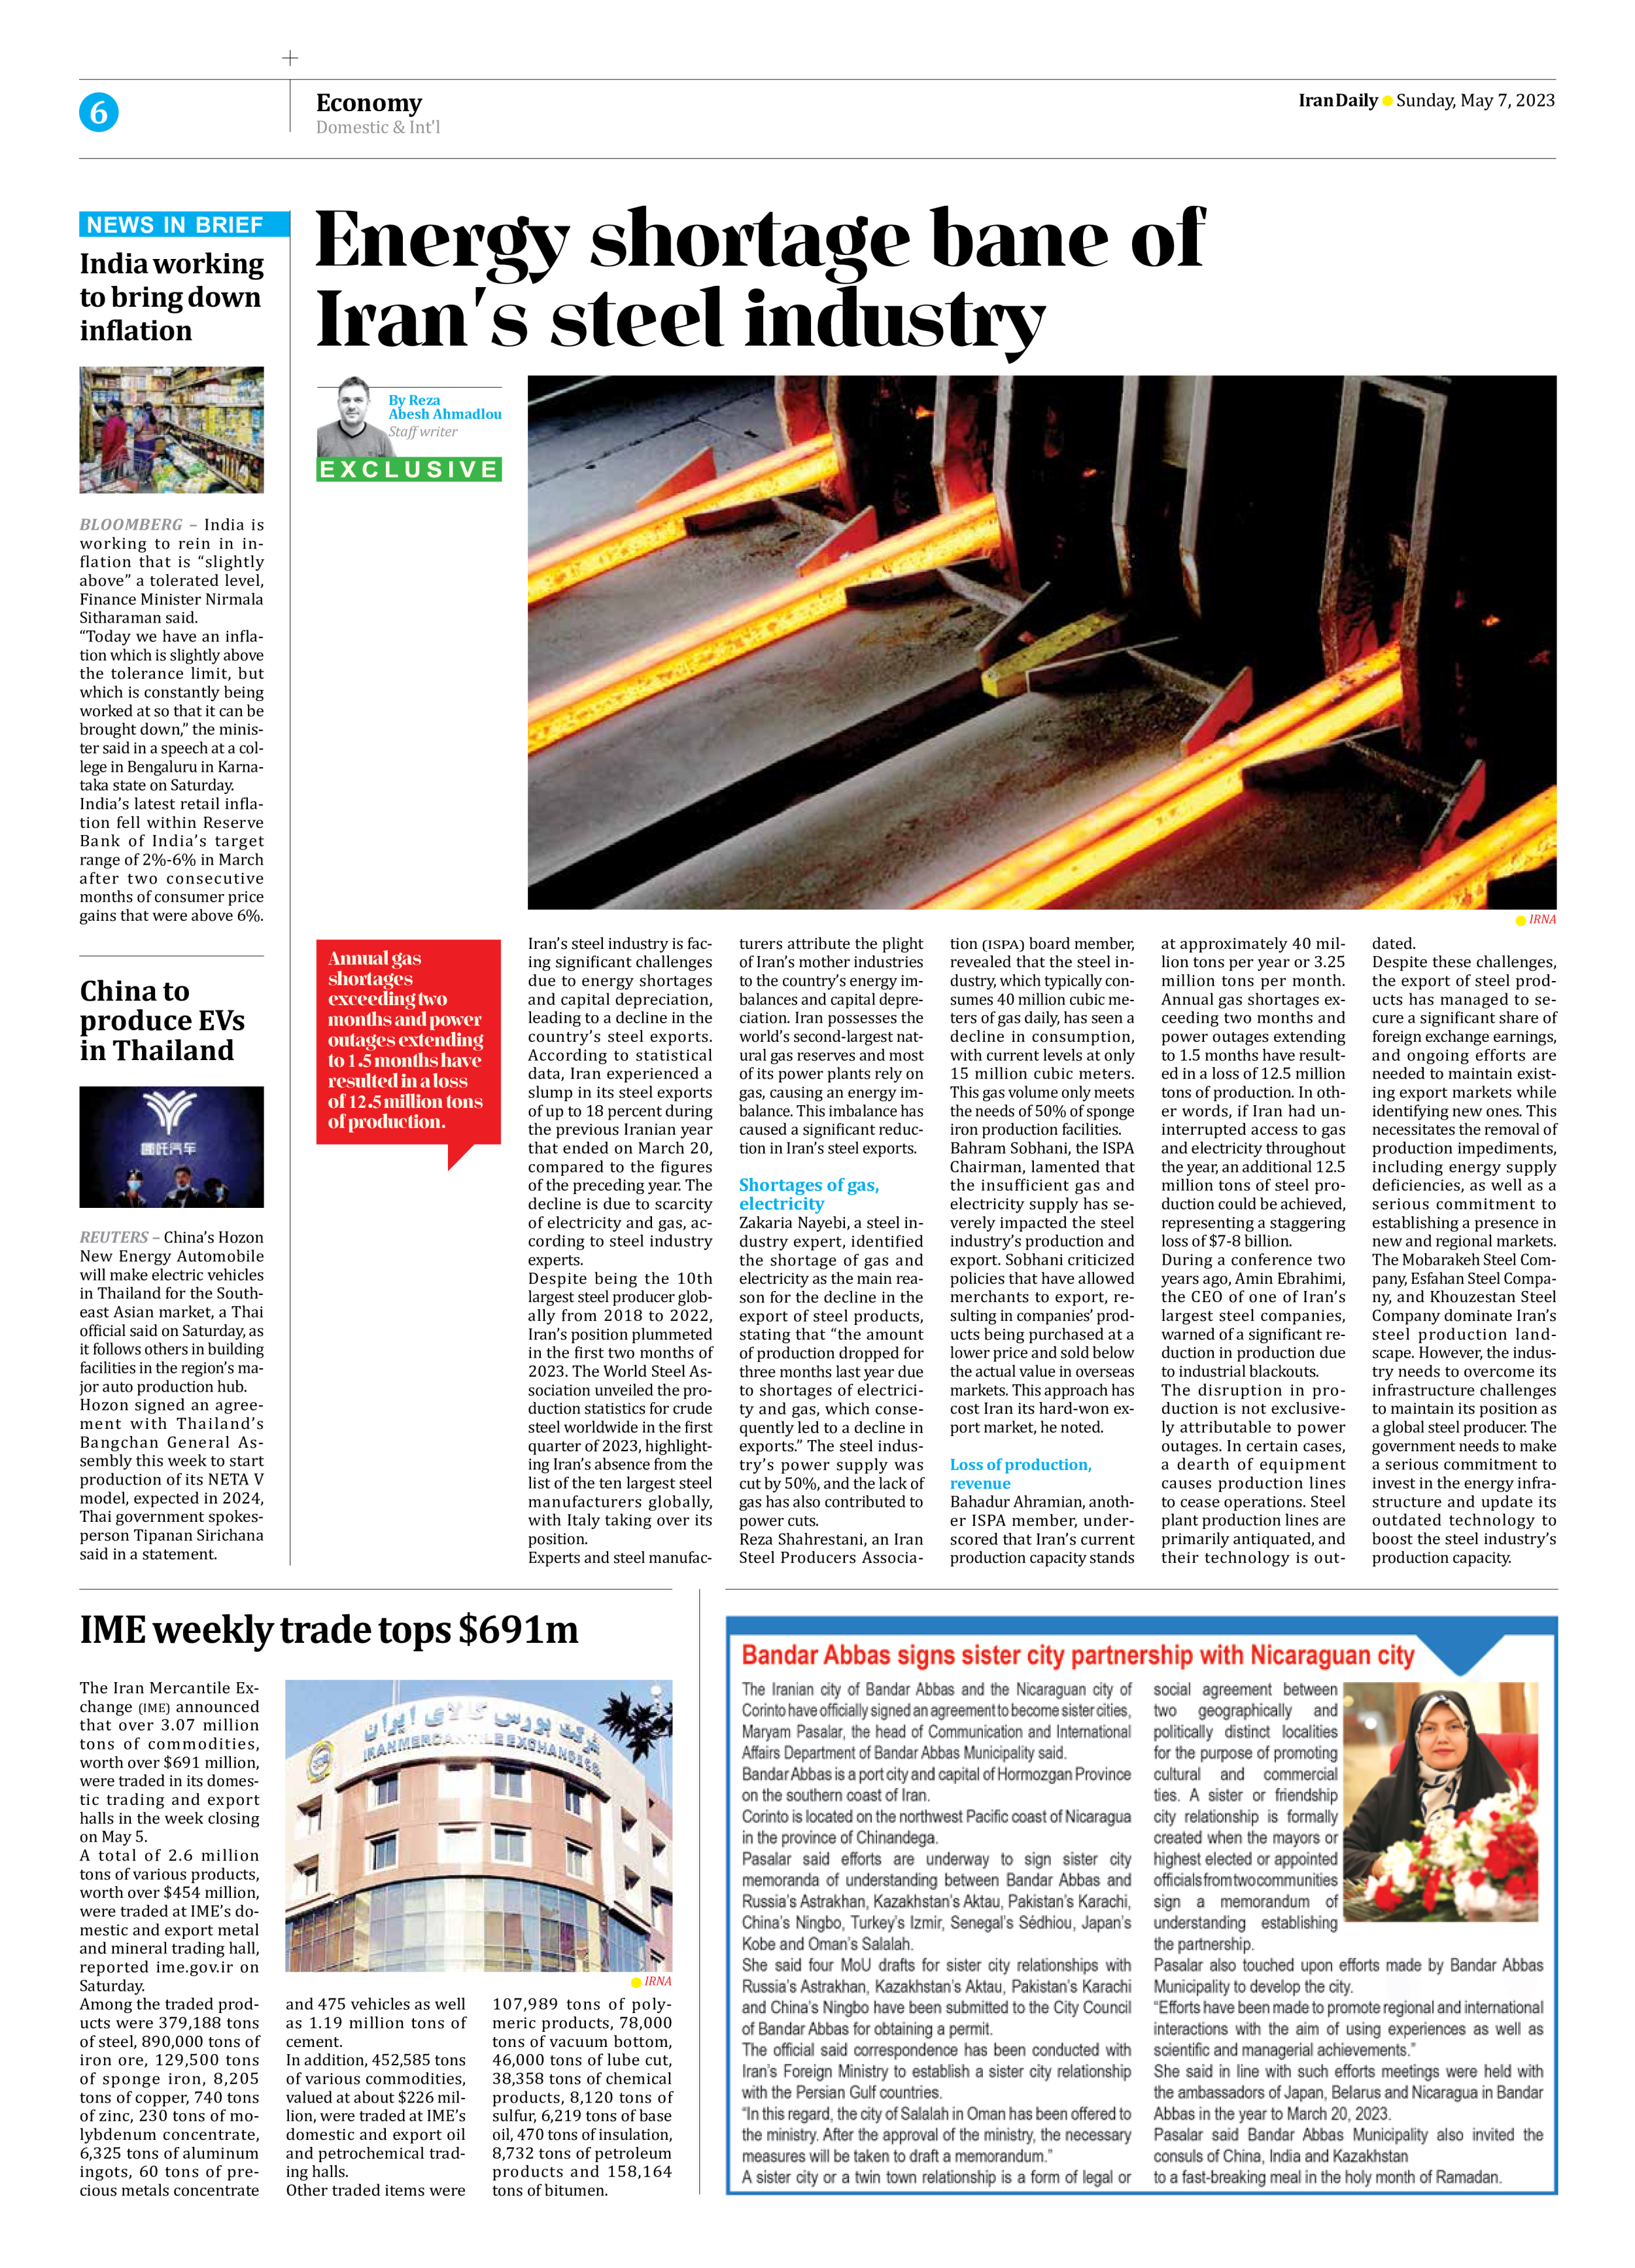 Iran Daily - Number Seven Thousand Two Hundred and Eighty Five - 07 May 2023 - Page 6